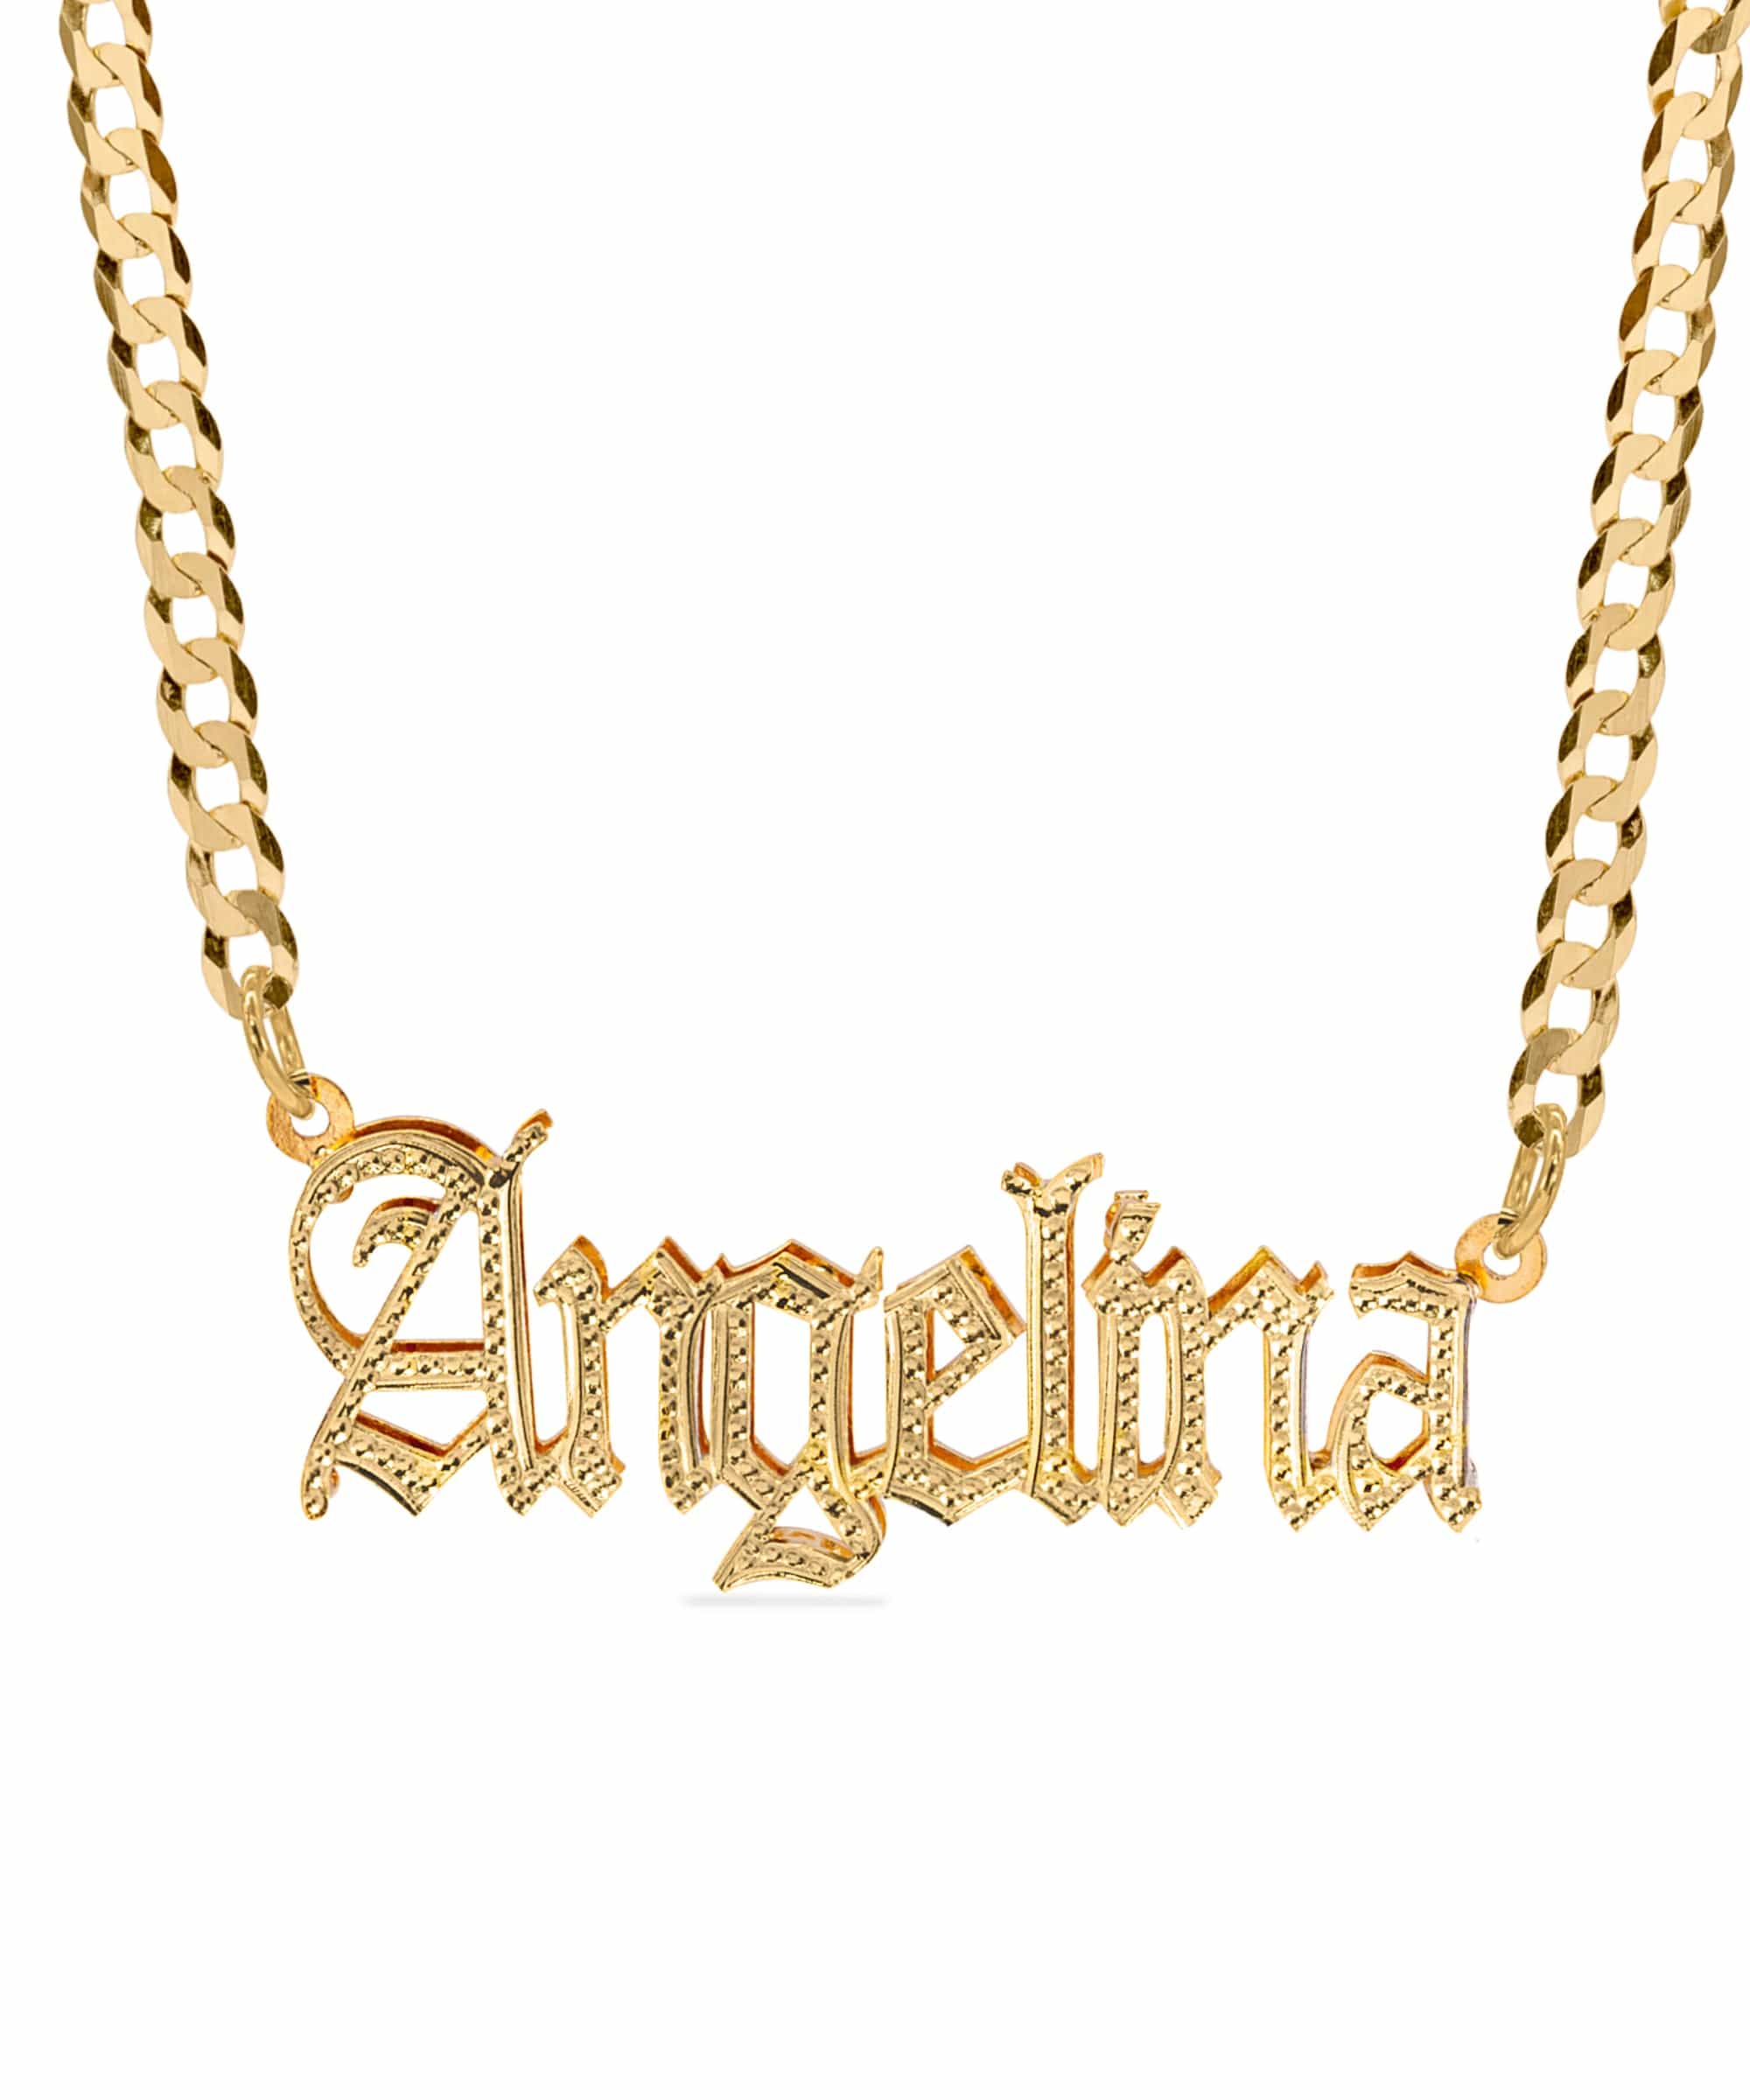 The Golden Double Plated Gothic Name Necklace with Cuban Chain